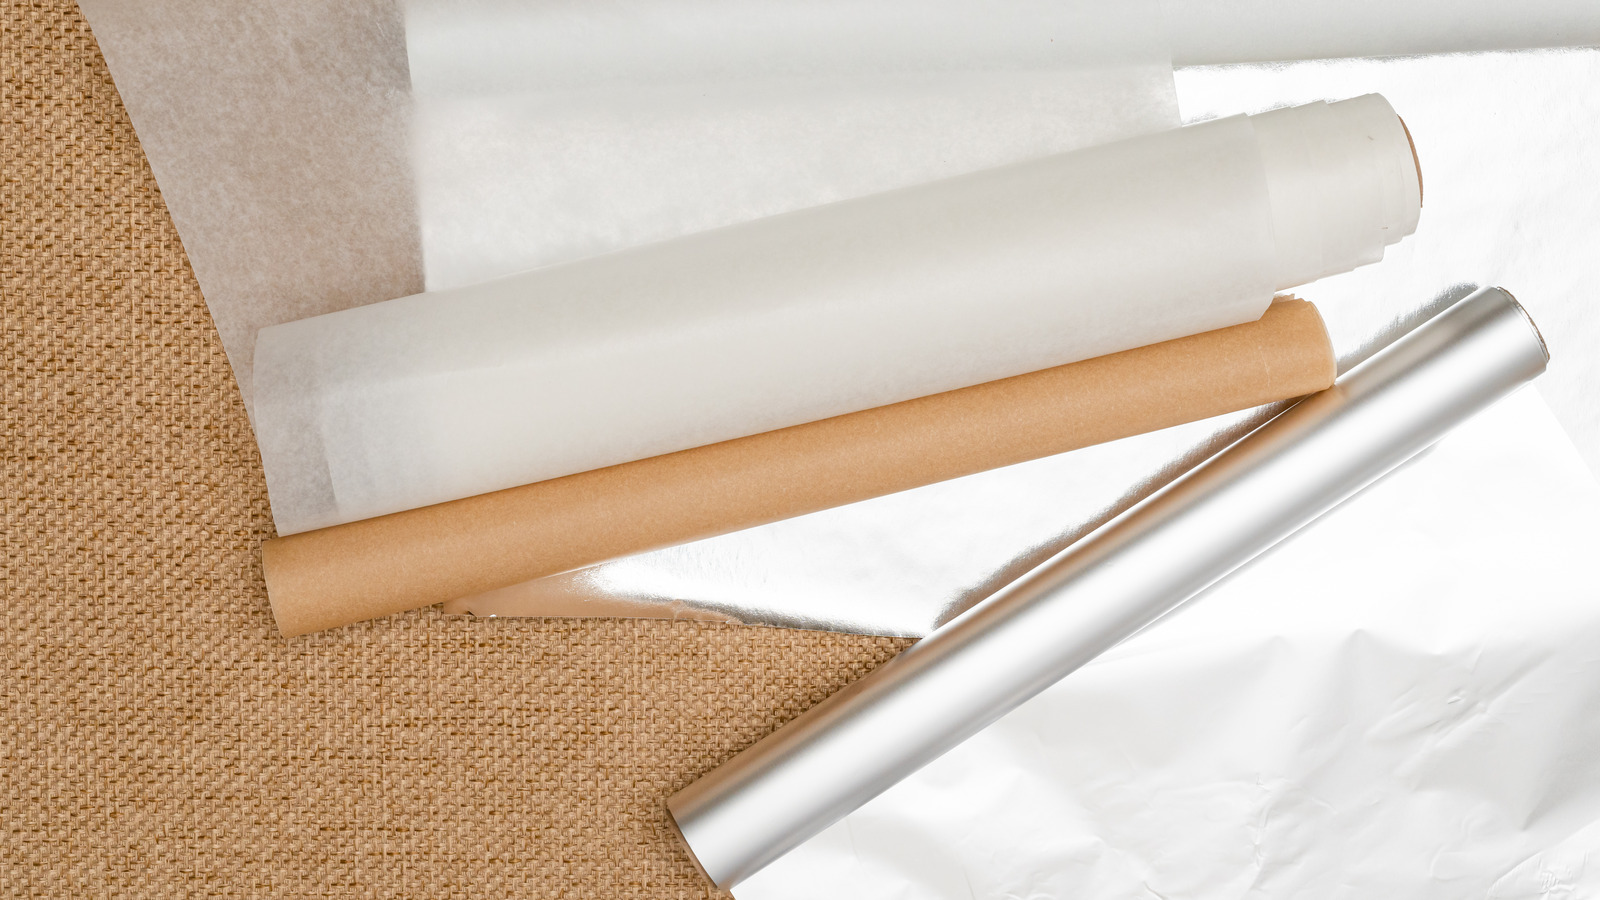 Can I Use Wax Paper Instead of Parchment Paper?